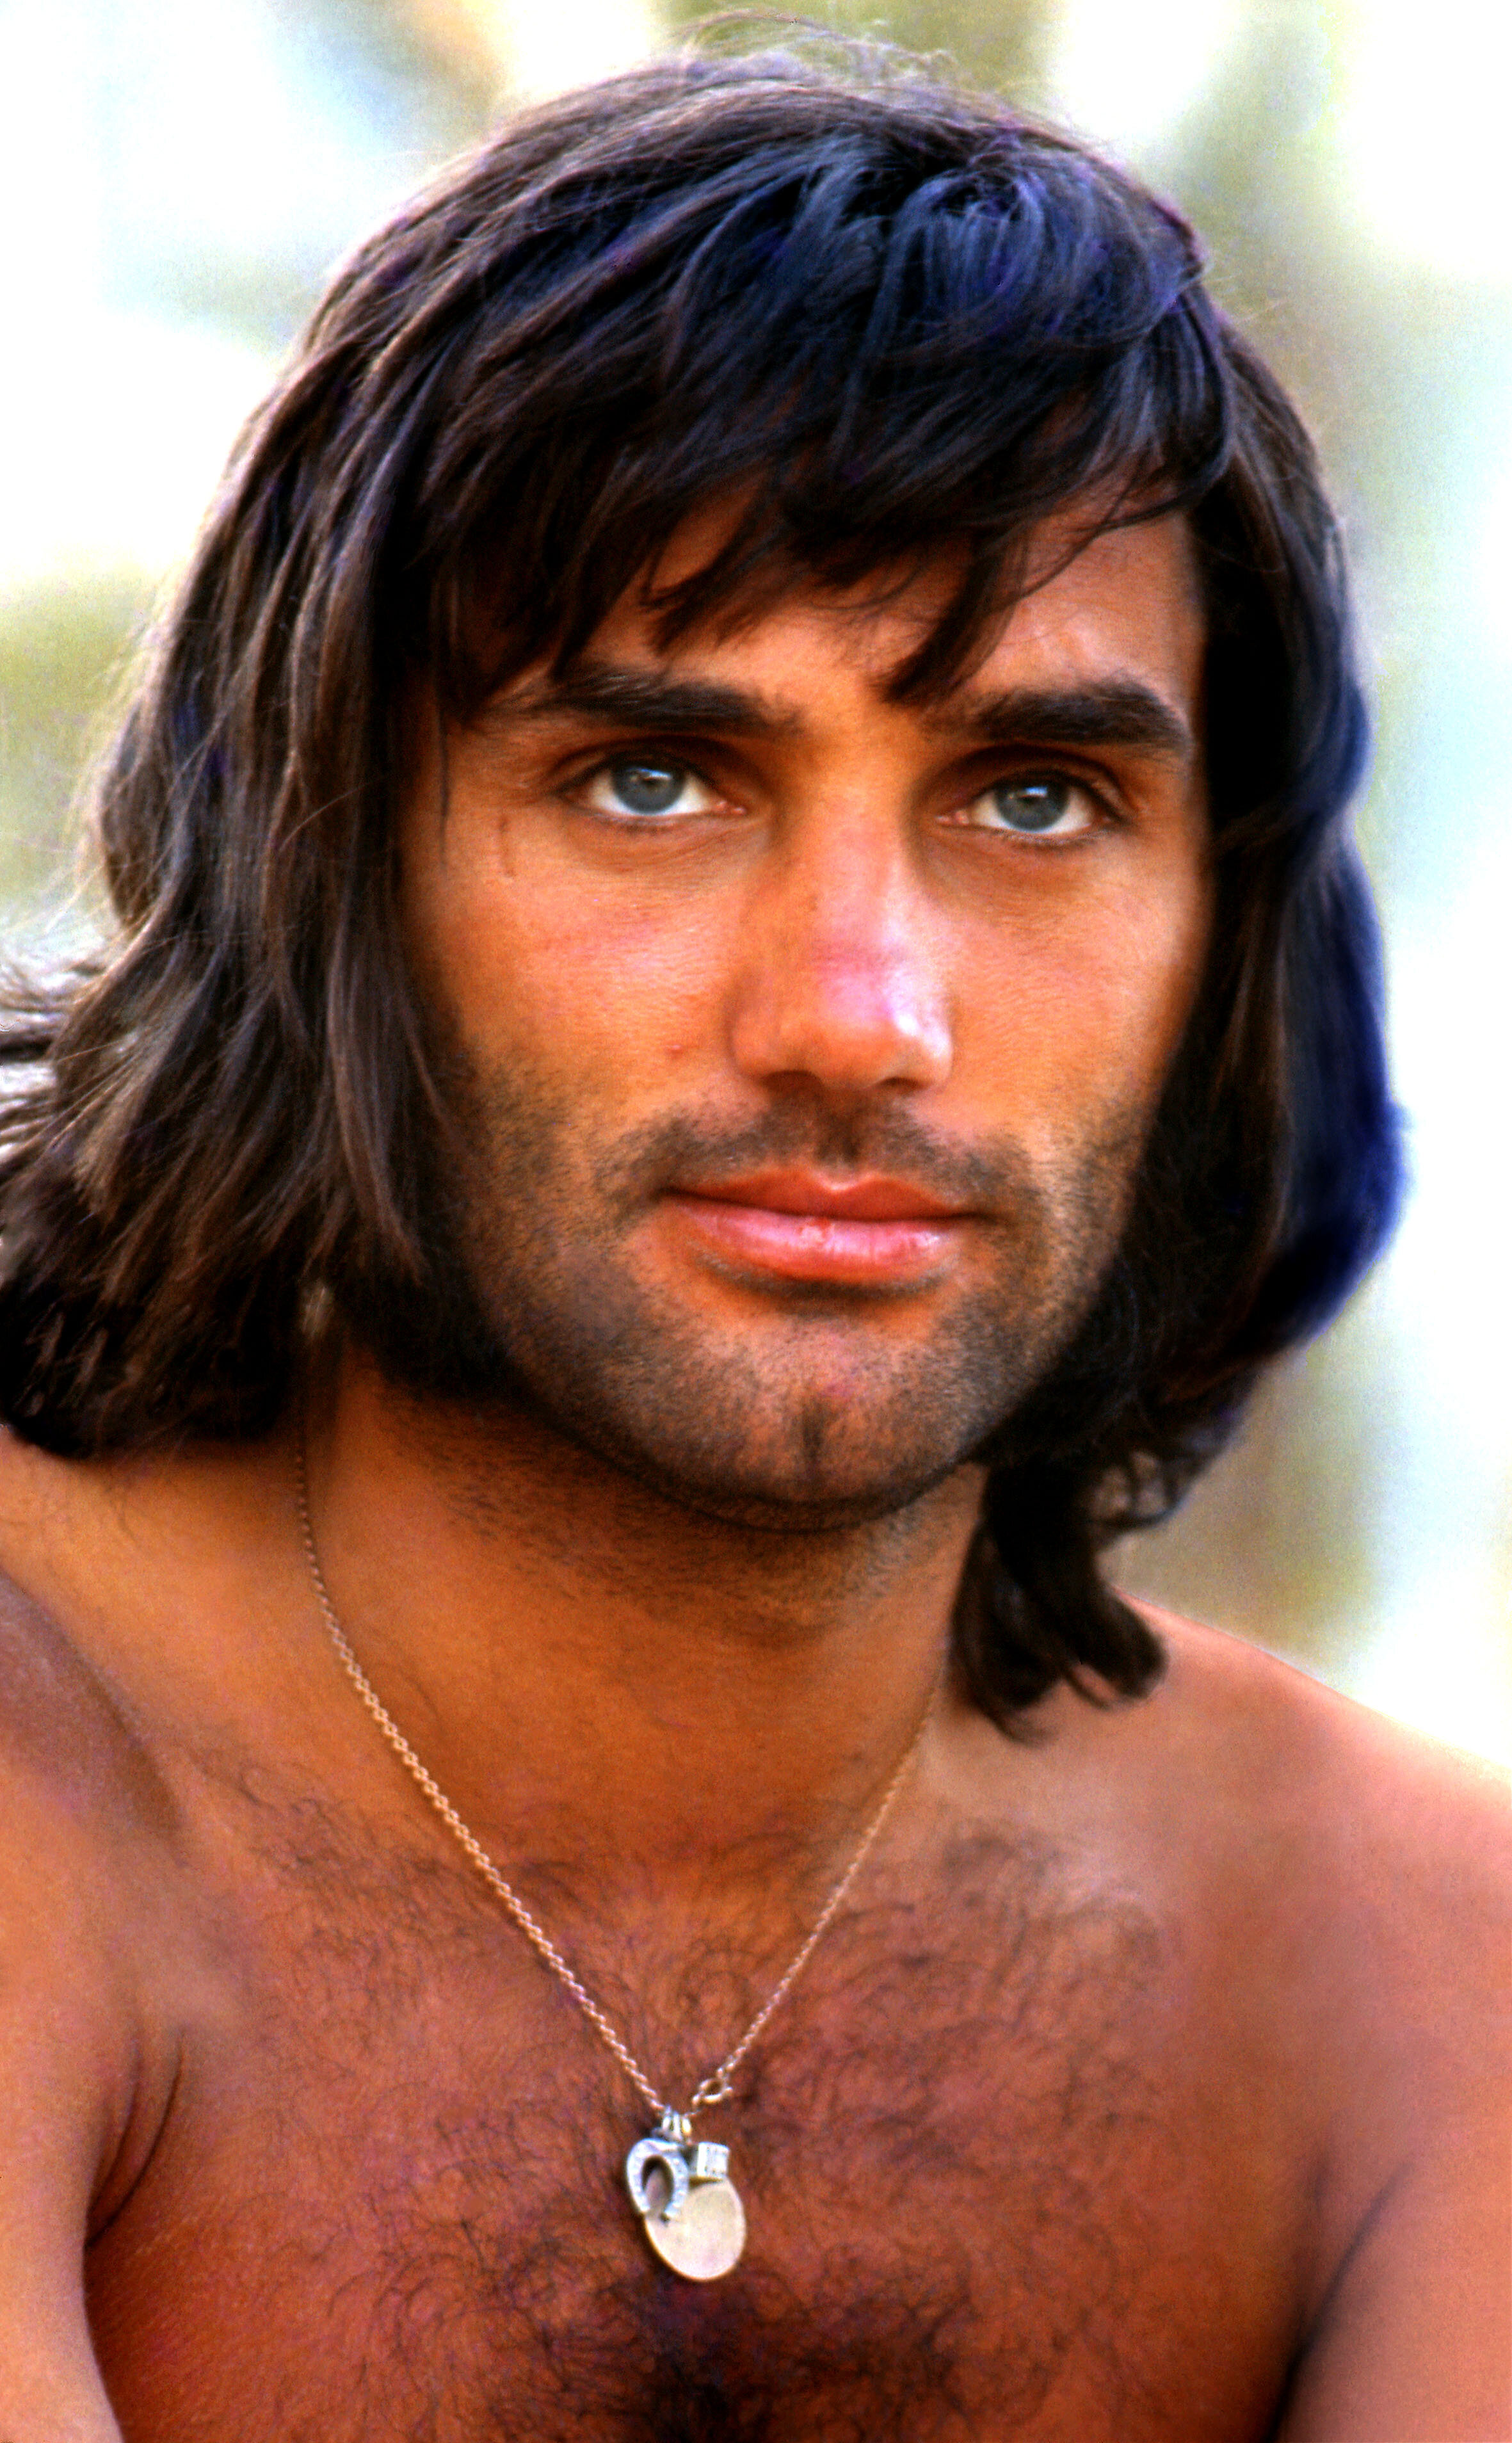 George Best on holiday in Majorca.